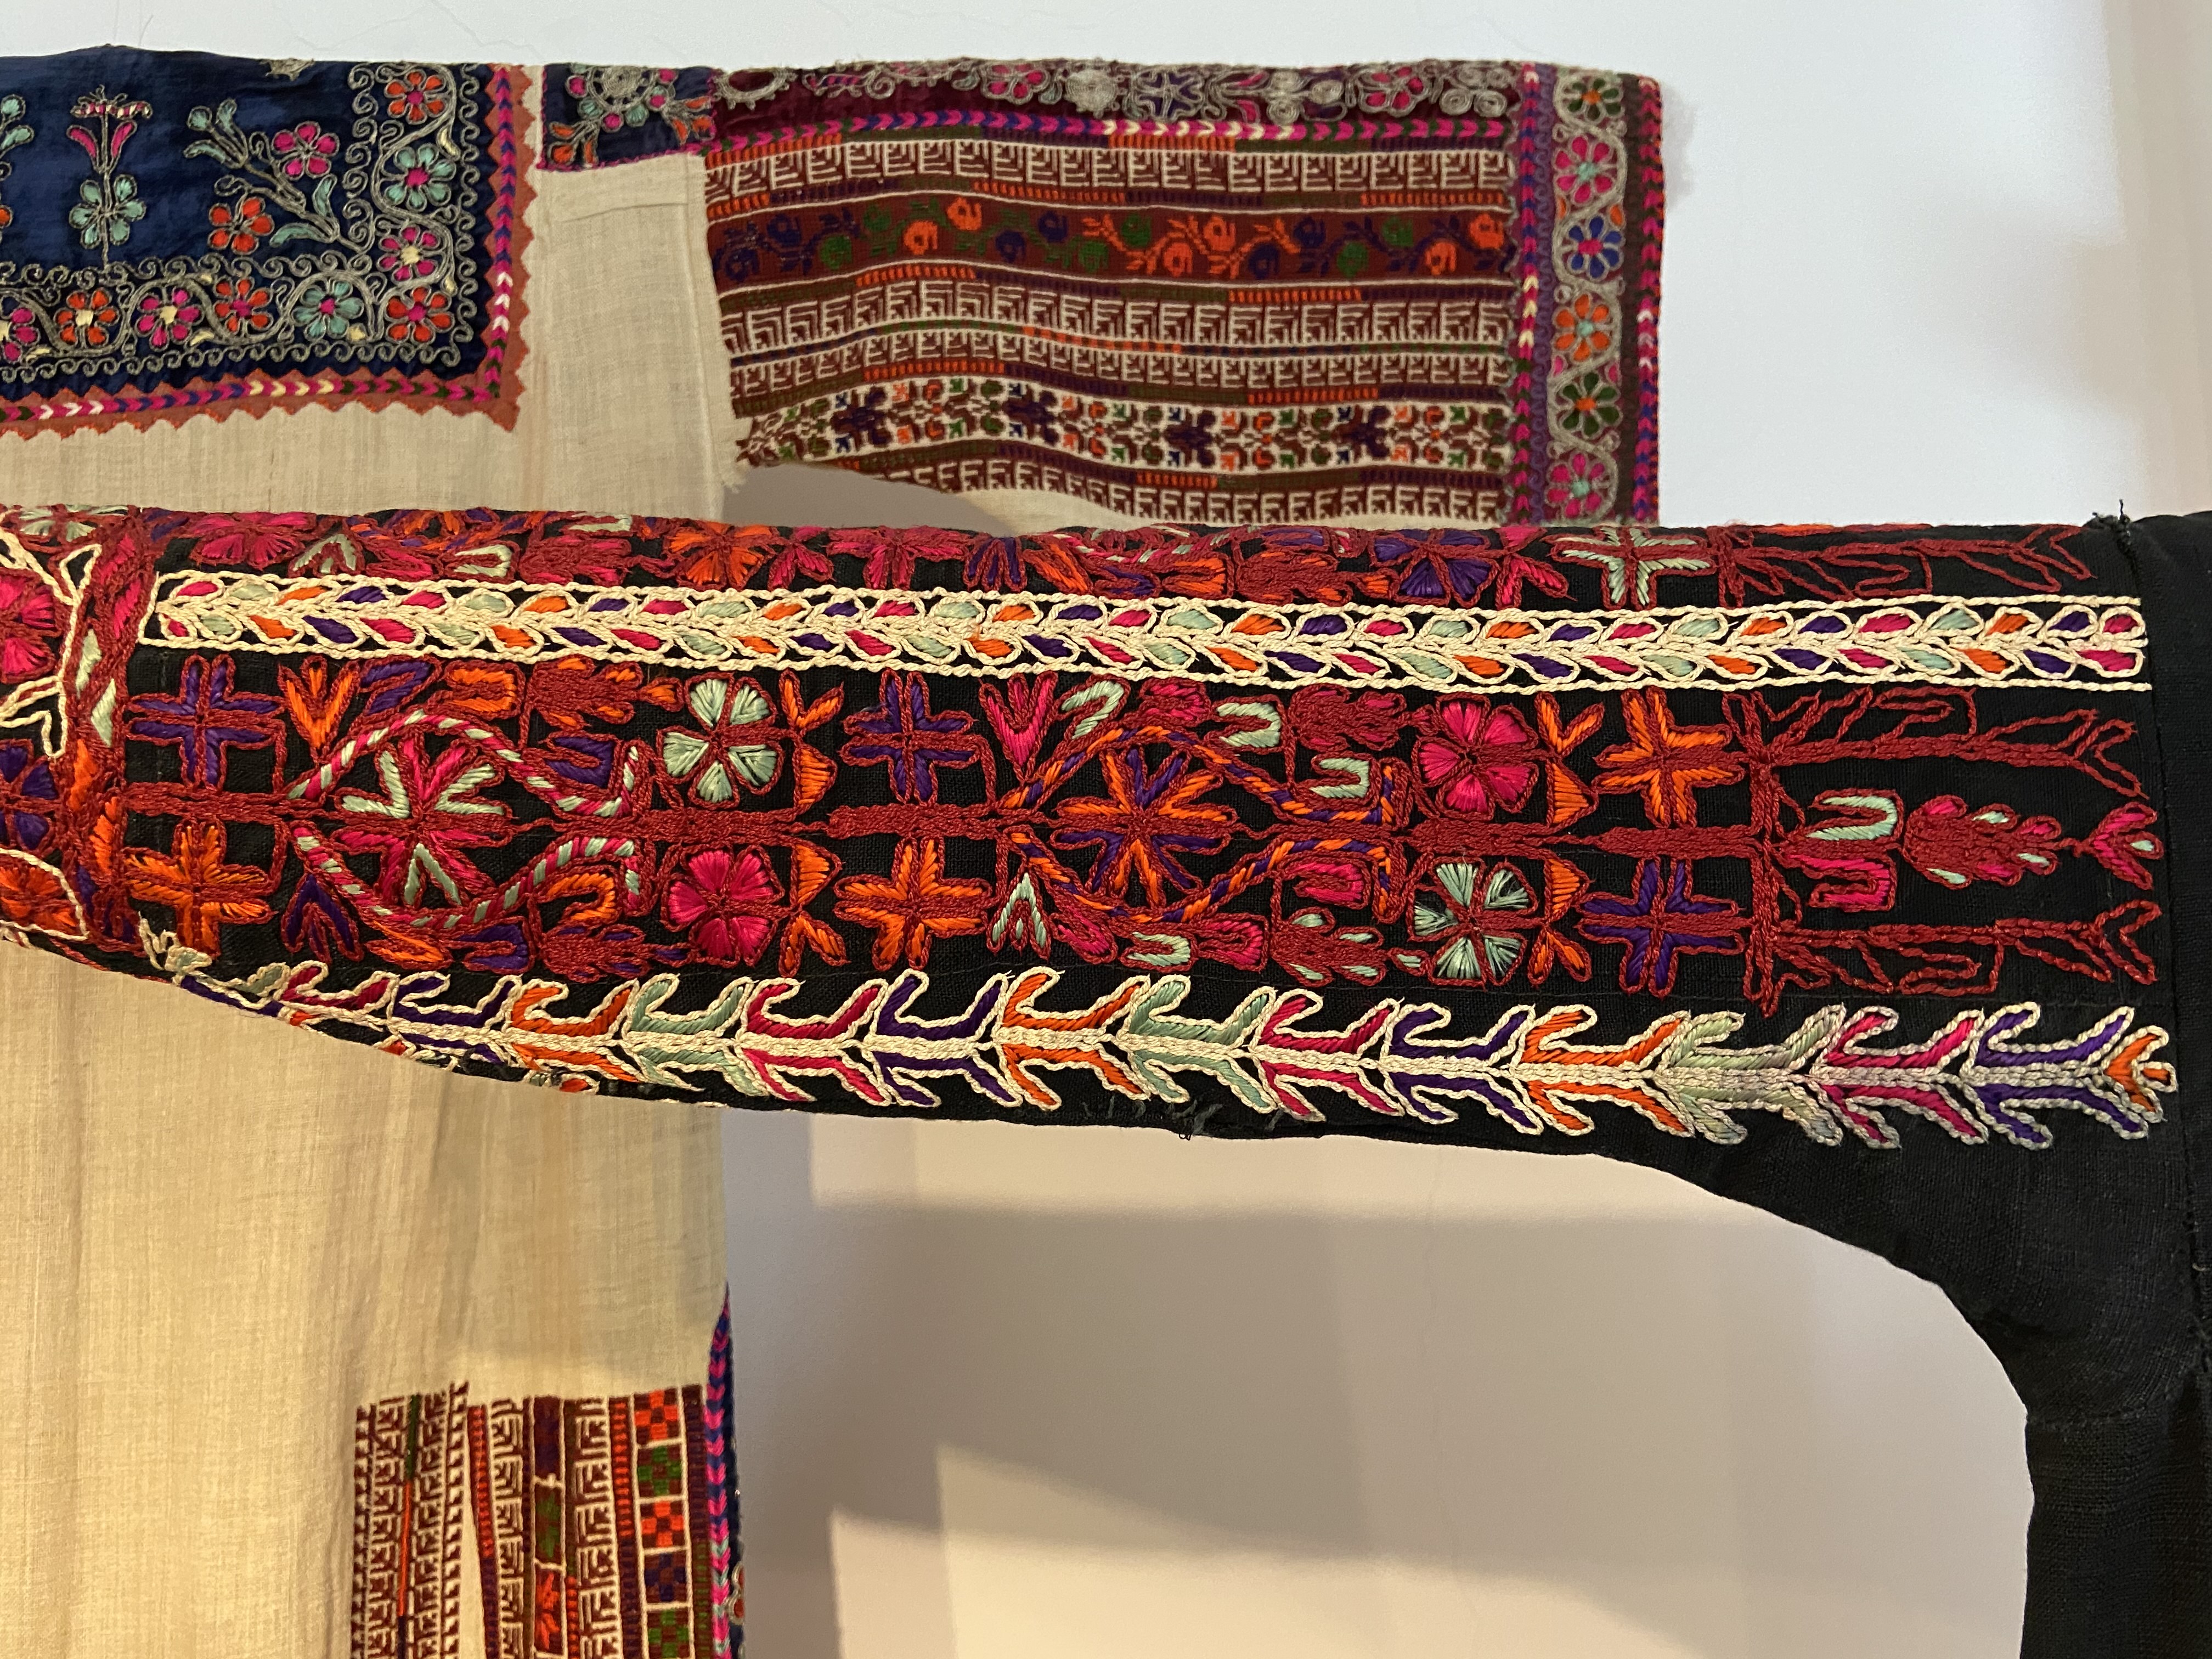 Exploring the History and Meaning Behind Palestinian Embroidery